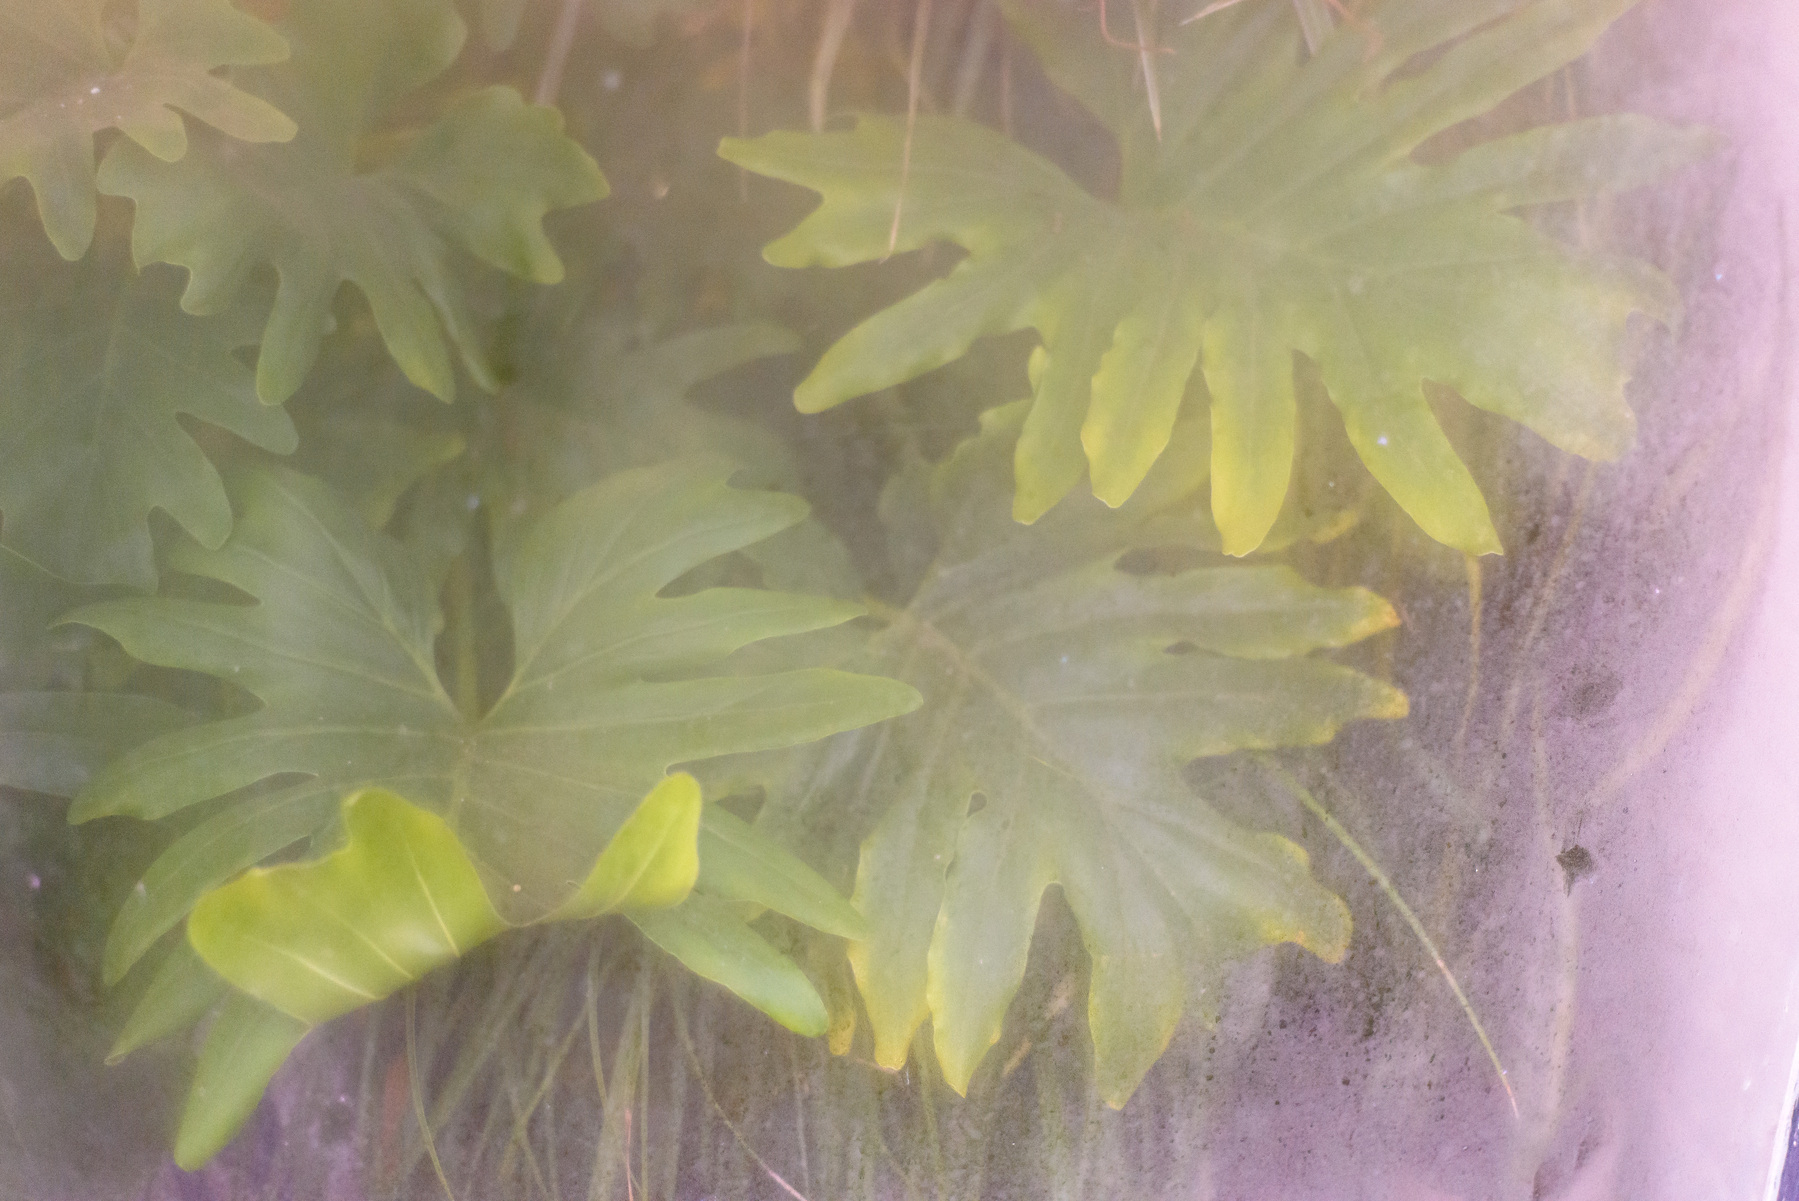 Tropical plant leaves through a window with condensation on it.